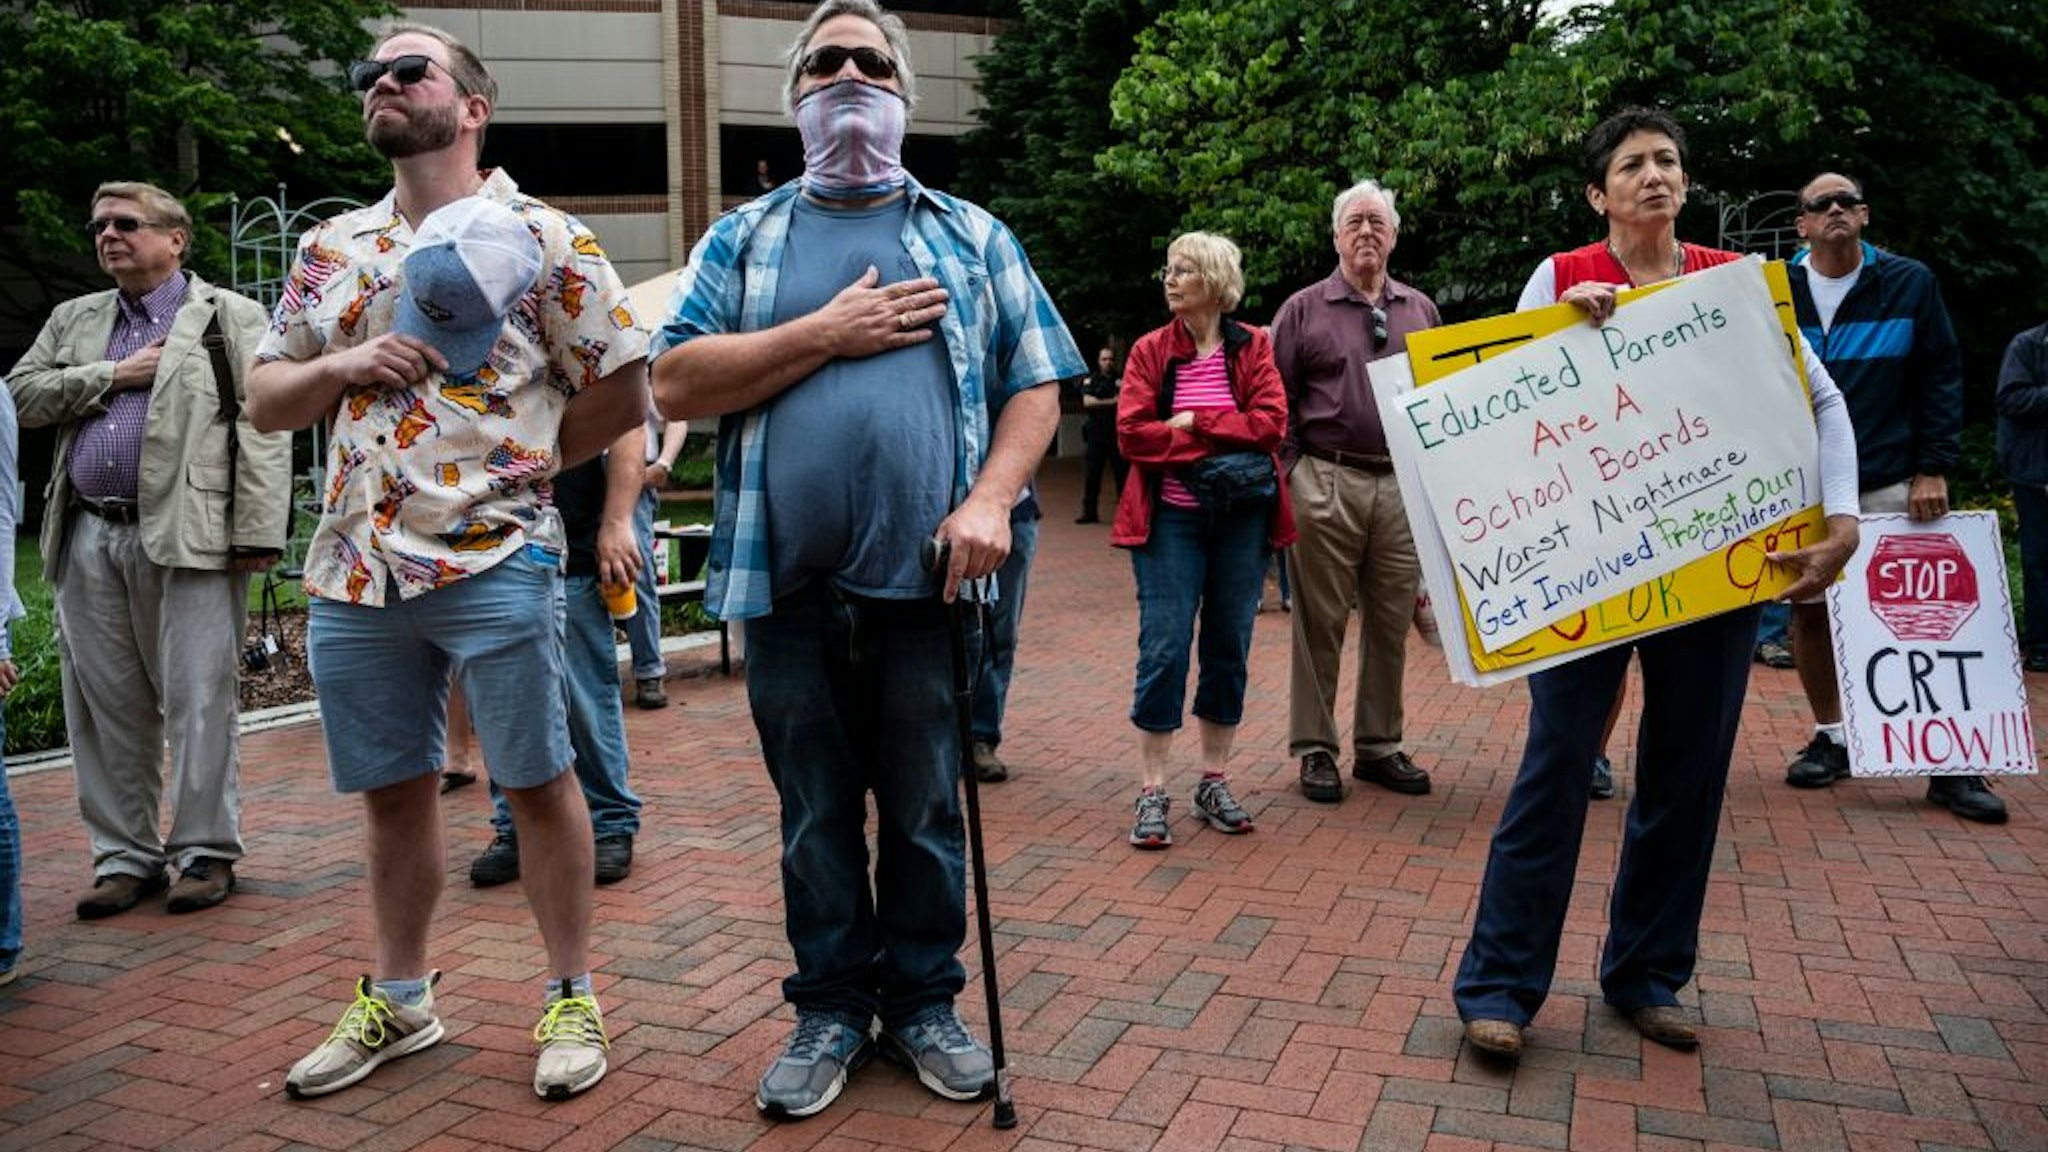 People hold up signs during a rally against "critical race theory" (CRT) being taught in schools at the Loudoun County Government center in Leesburg, Virginia on June 12, 2021. - "Are you ready to take back our schools?" Republican activist Patti Menders shouted at a rally opposing anti-racism teaching that critics like her say trains white children to see themselves as "oppressors." "Yes!", answered in unison the hundreds of demonstrators gathered this weekend near Washington to fight against "critical race theory," the latest battleground of America's ongoing culture wars. The term "critical race theory" defines a strand of thought that appeared in American law schools in the late 1970s and which looks at racism as a system, enabled by laws and institutions, rather than at the level of individual prejudices. But critics use it as a catch-all phrase that attacks teachers' efforts to confront dark episodes in American history, including slavery and segregation, as well as to tackle racist stereotypes. (Photo by ANDREW CABALLERO-REYNOLDS / AFP)